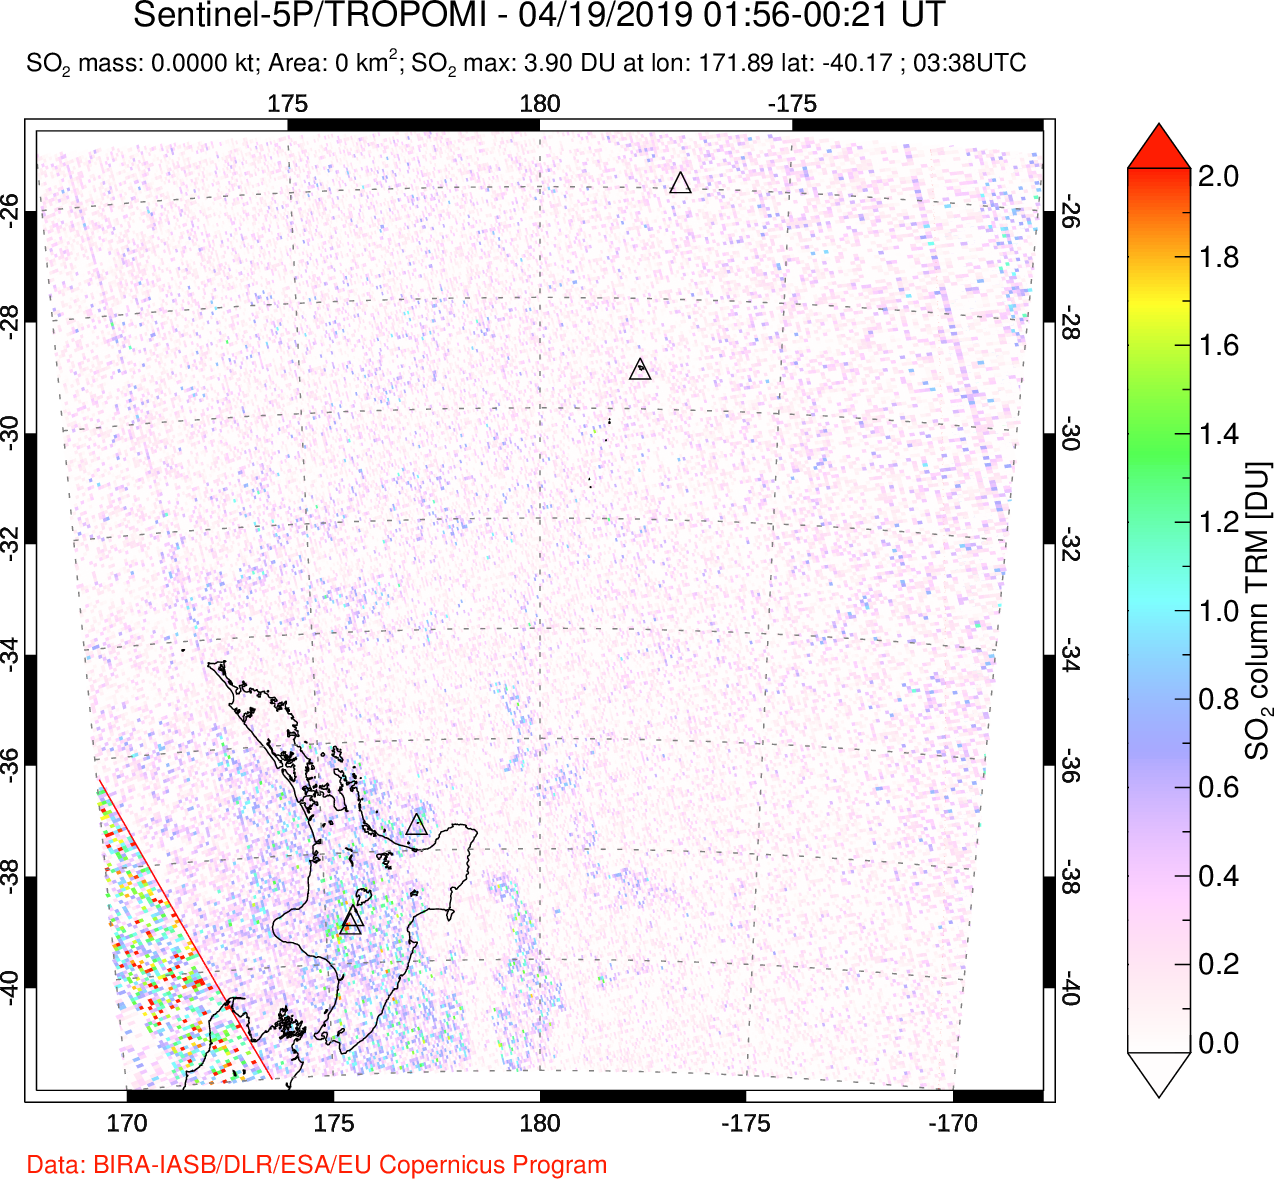 A sulfur dioxide image over New Zealand on Apr 19, 2019.